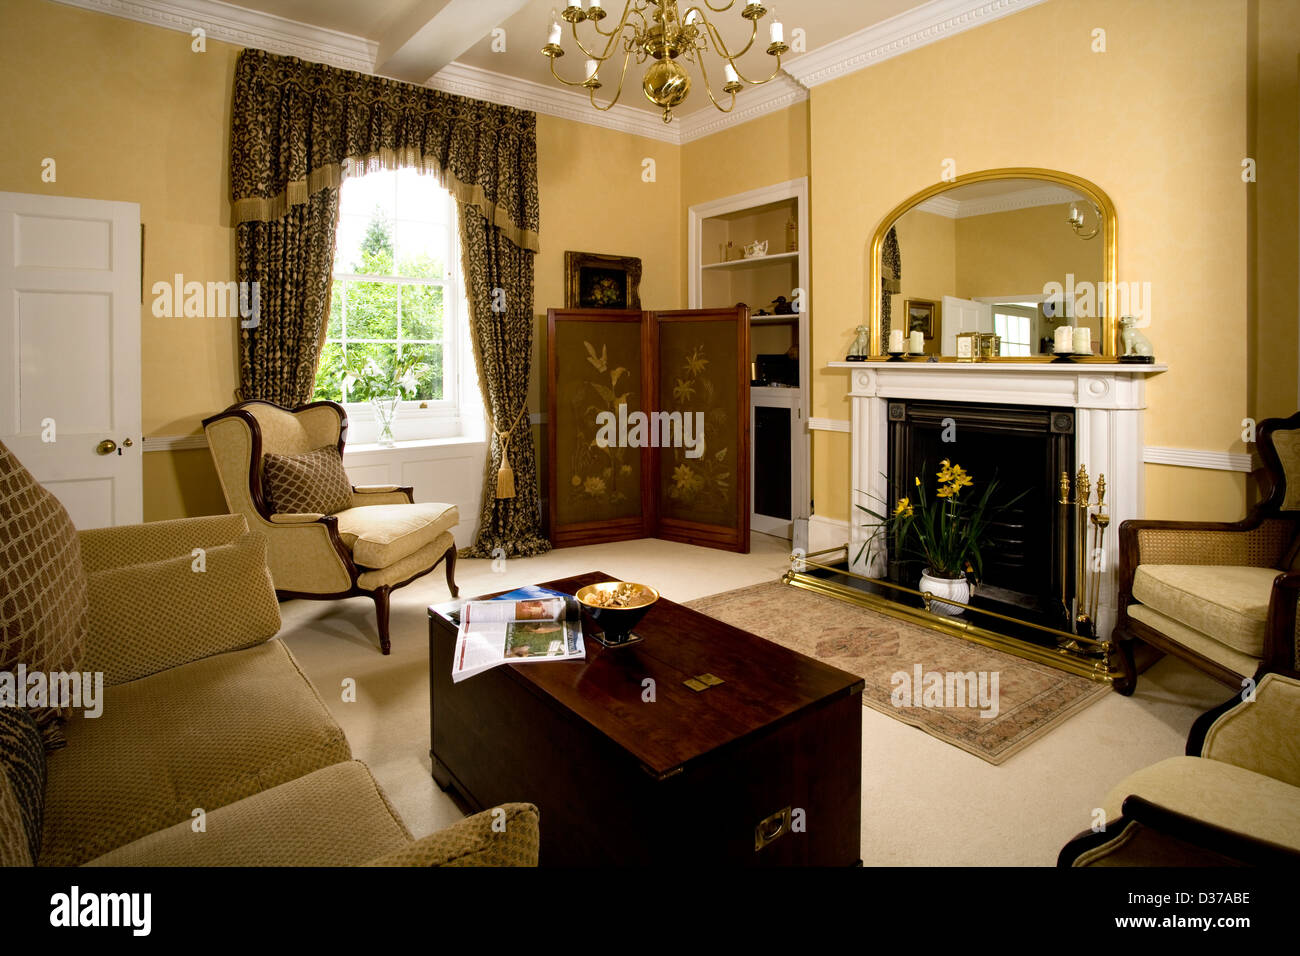 A traditionally furnished sitting room. Stock Photo